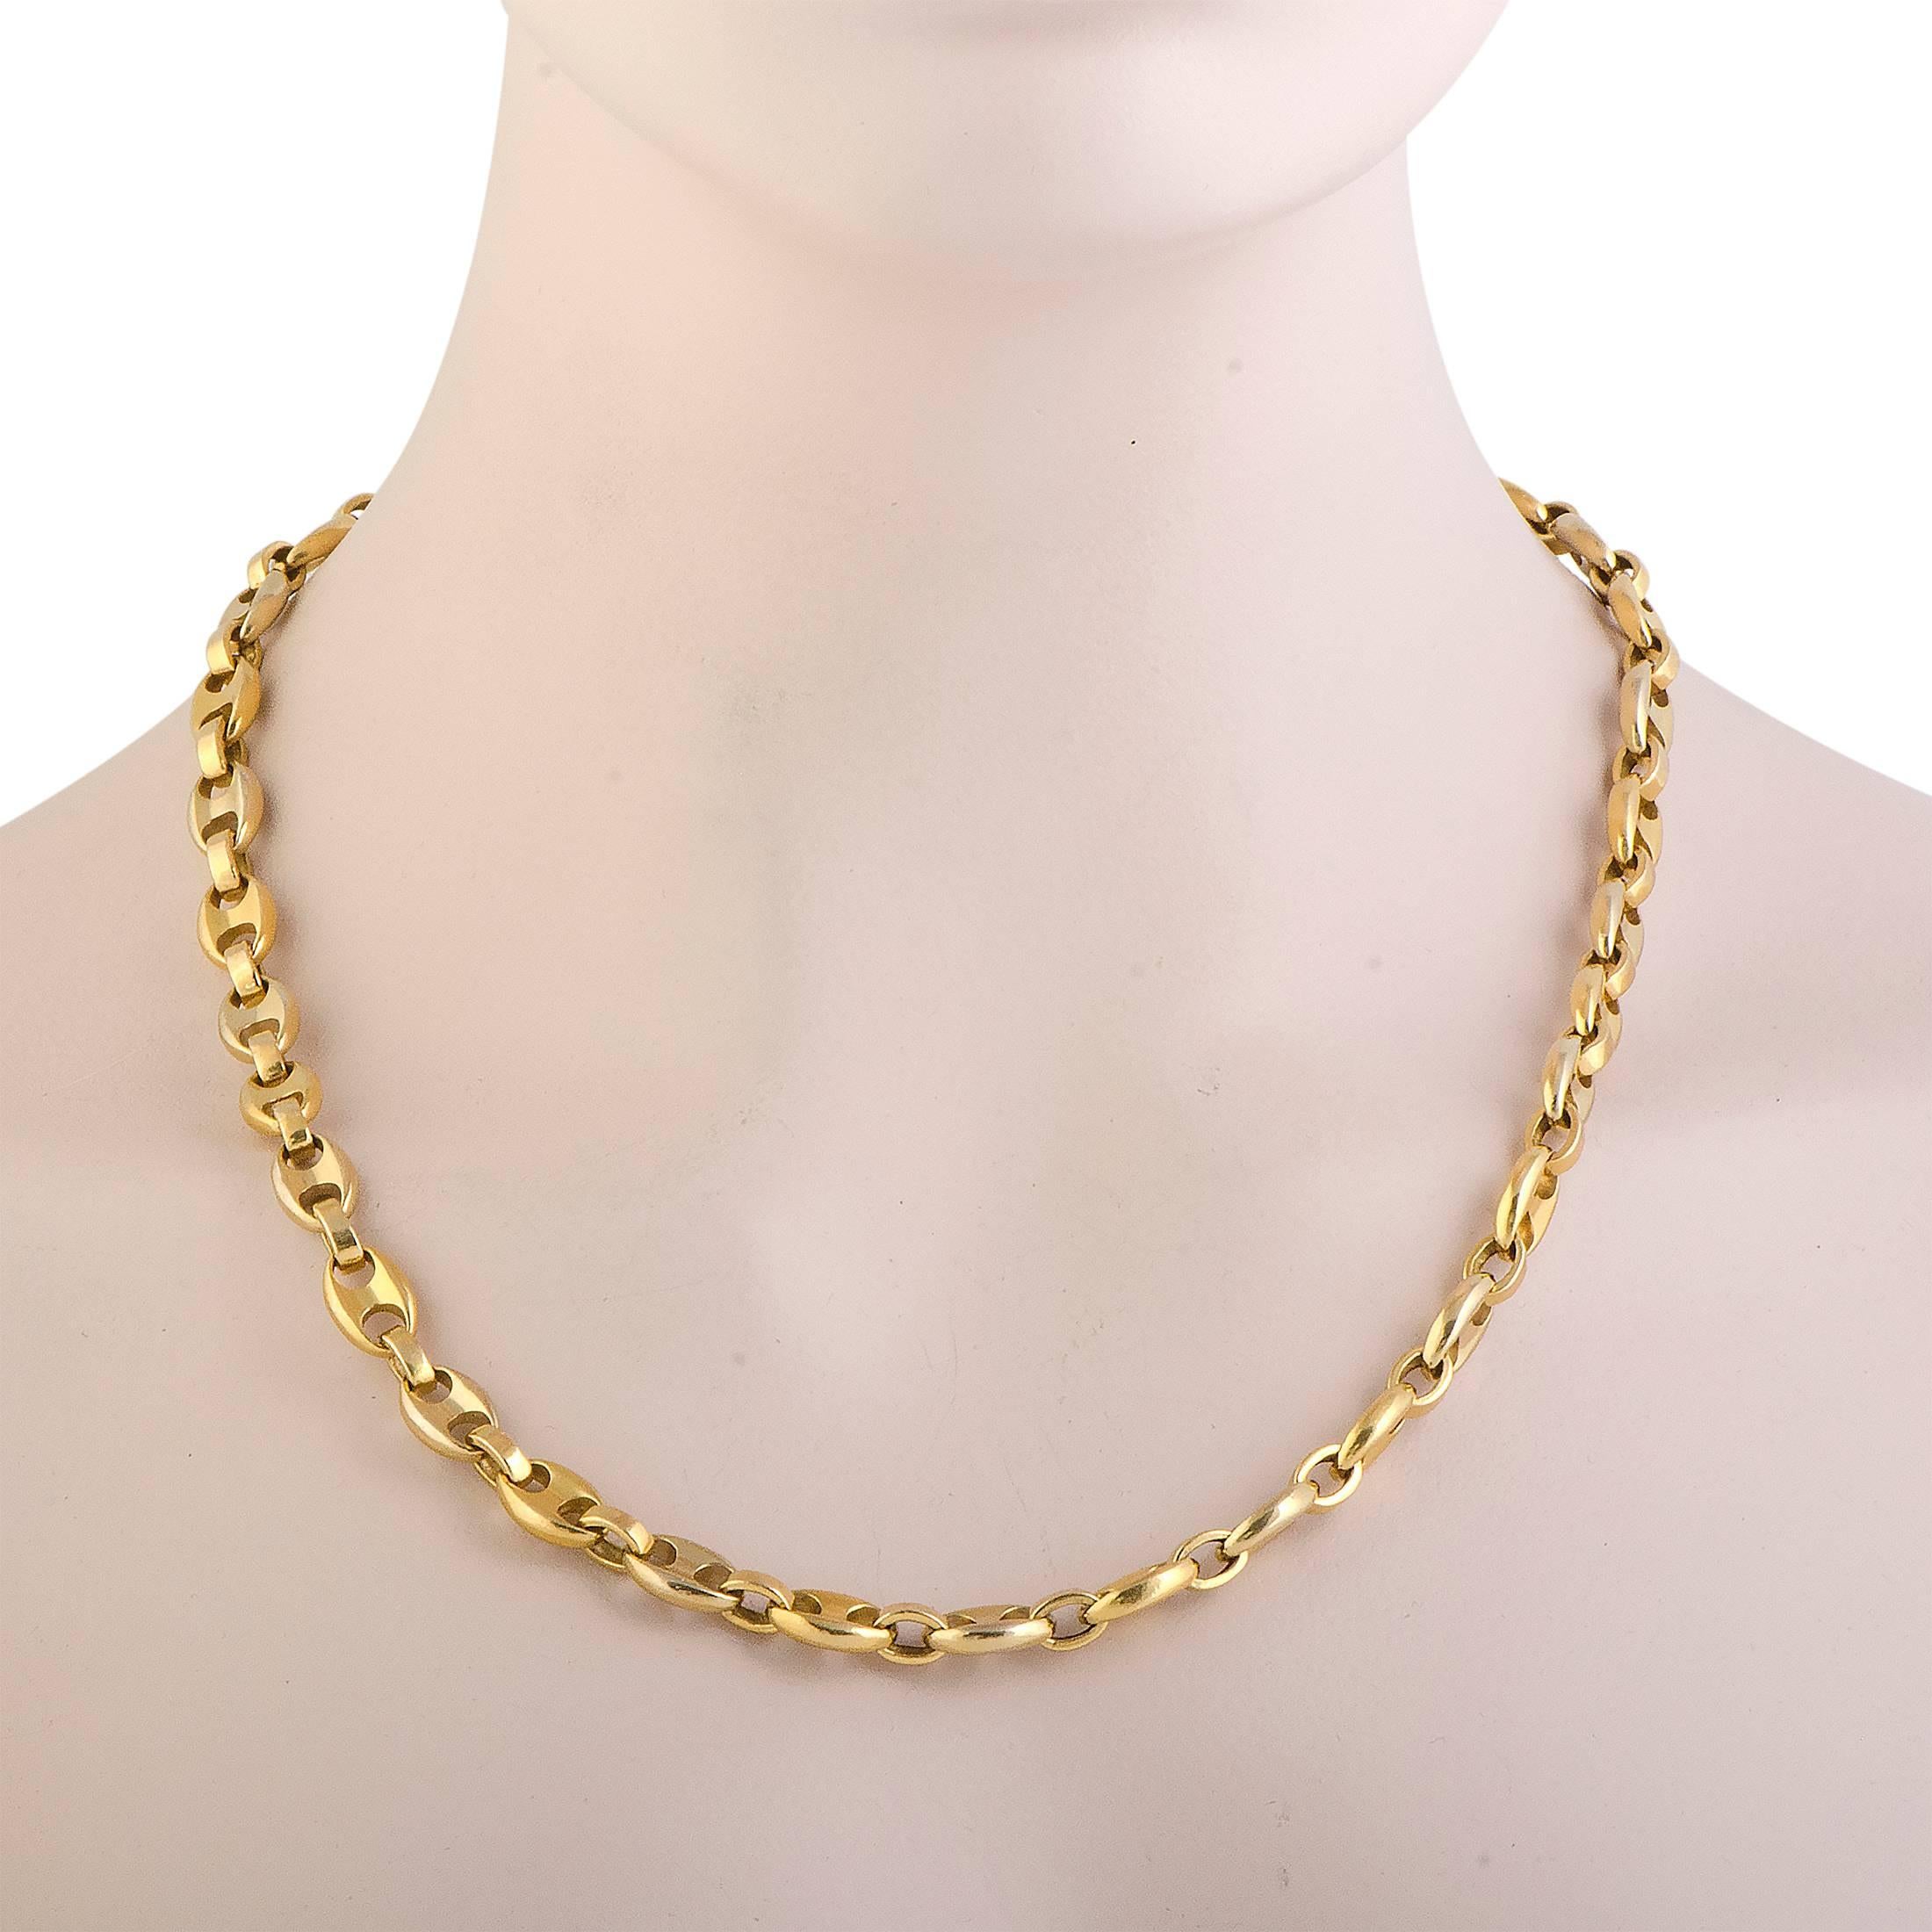 This stunning vintage Cartier necklace enchants with its neat, simple design and luxurious golden sheen. The necklace is made of radiant 18K yellow gold and weighs 147.5 grams.
